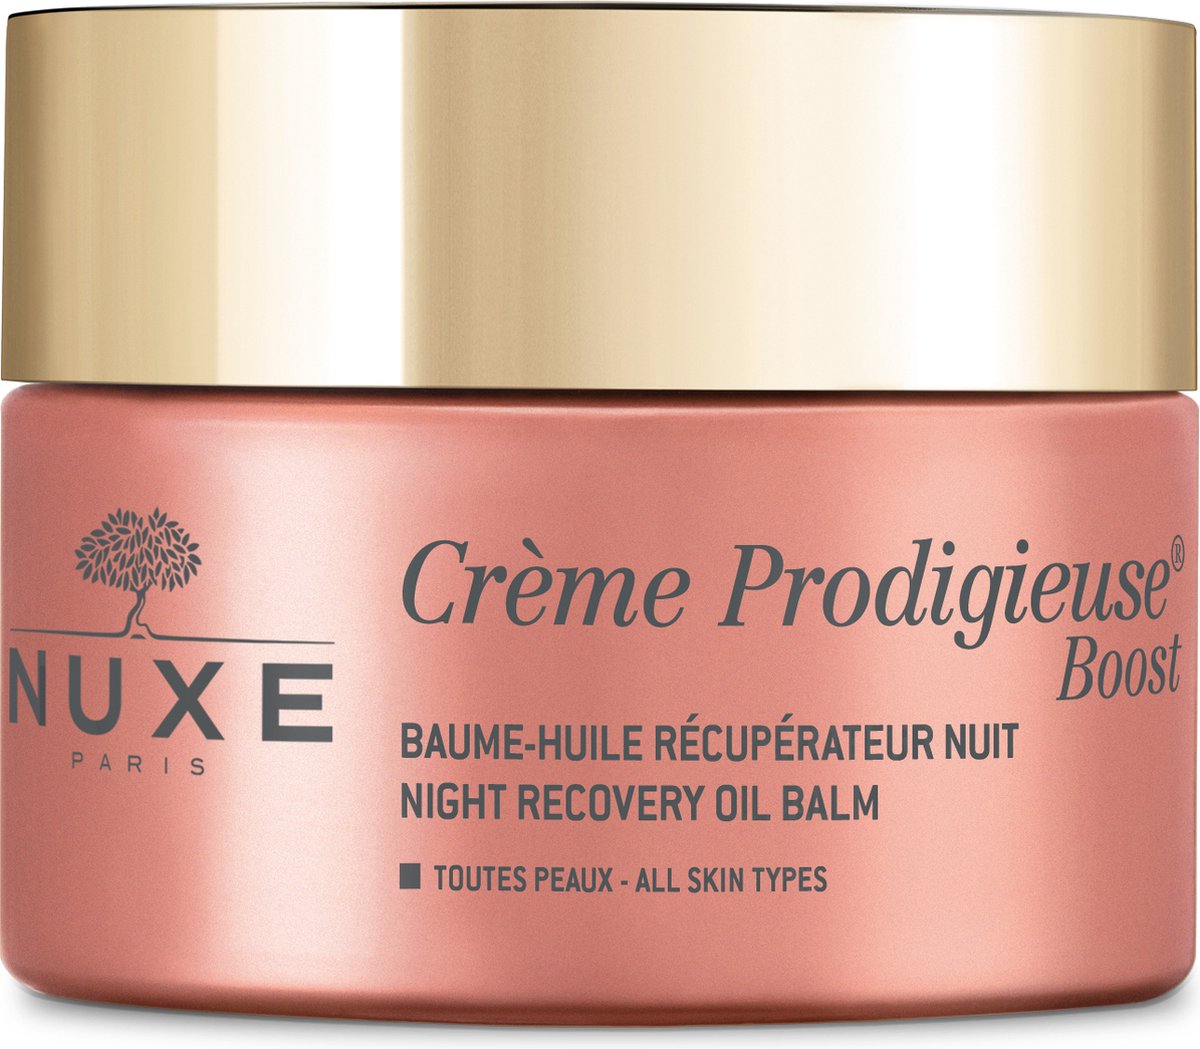 Nuxe Prodigieuse Boost Night Recovery Oil Balm - 50 ml - Nuxe